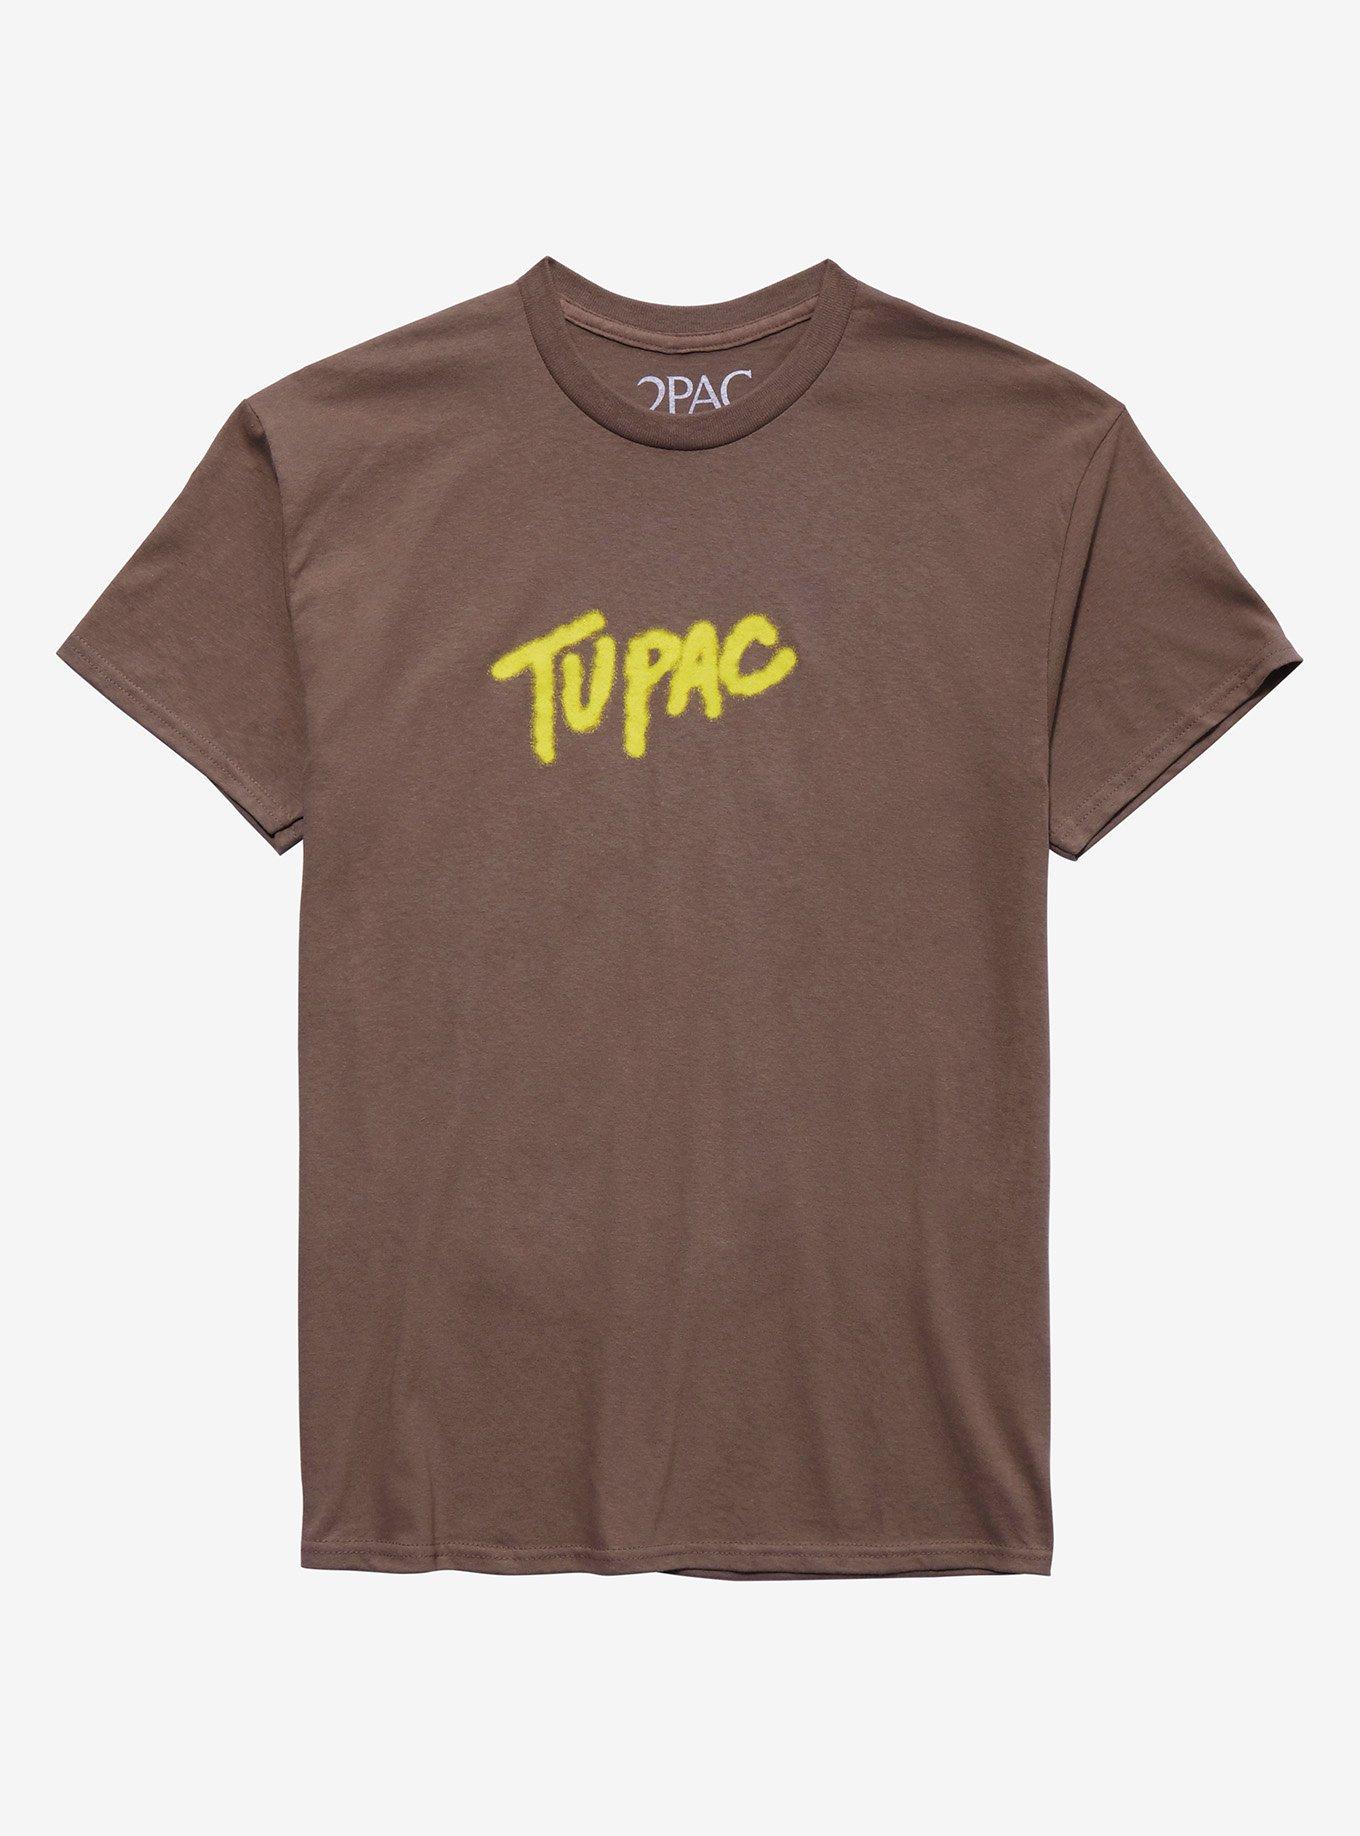 Tupac The Rose That Grew From Concrete Text T-Shirt